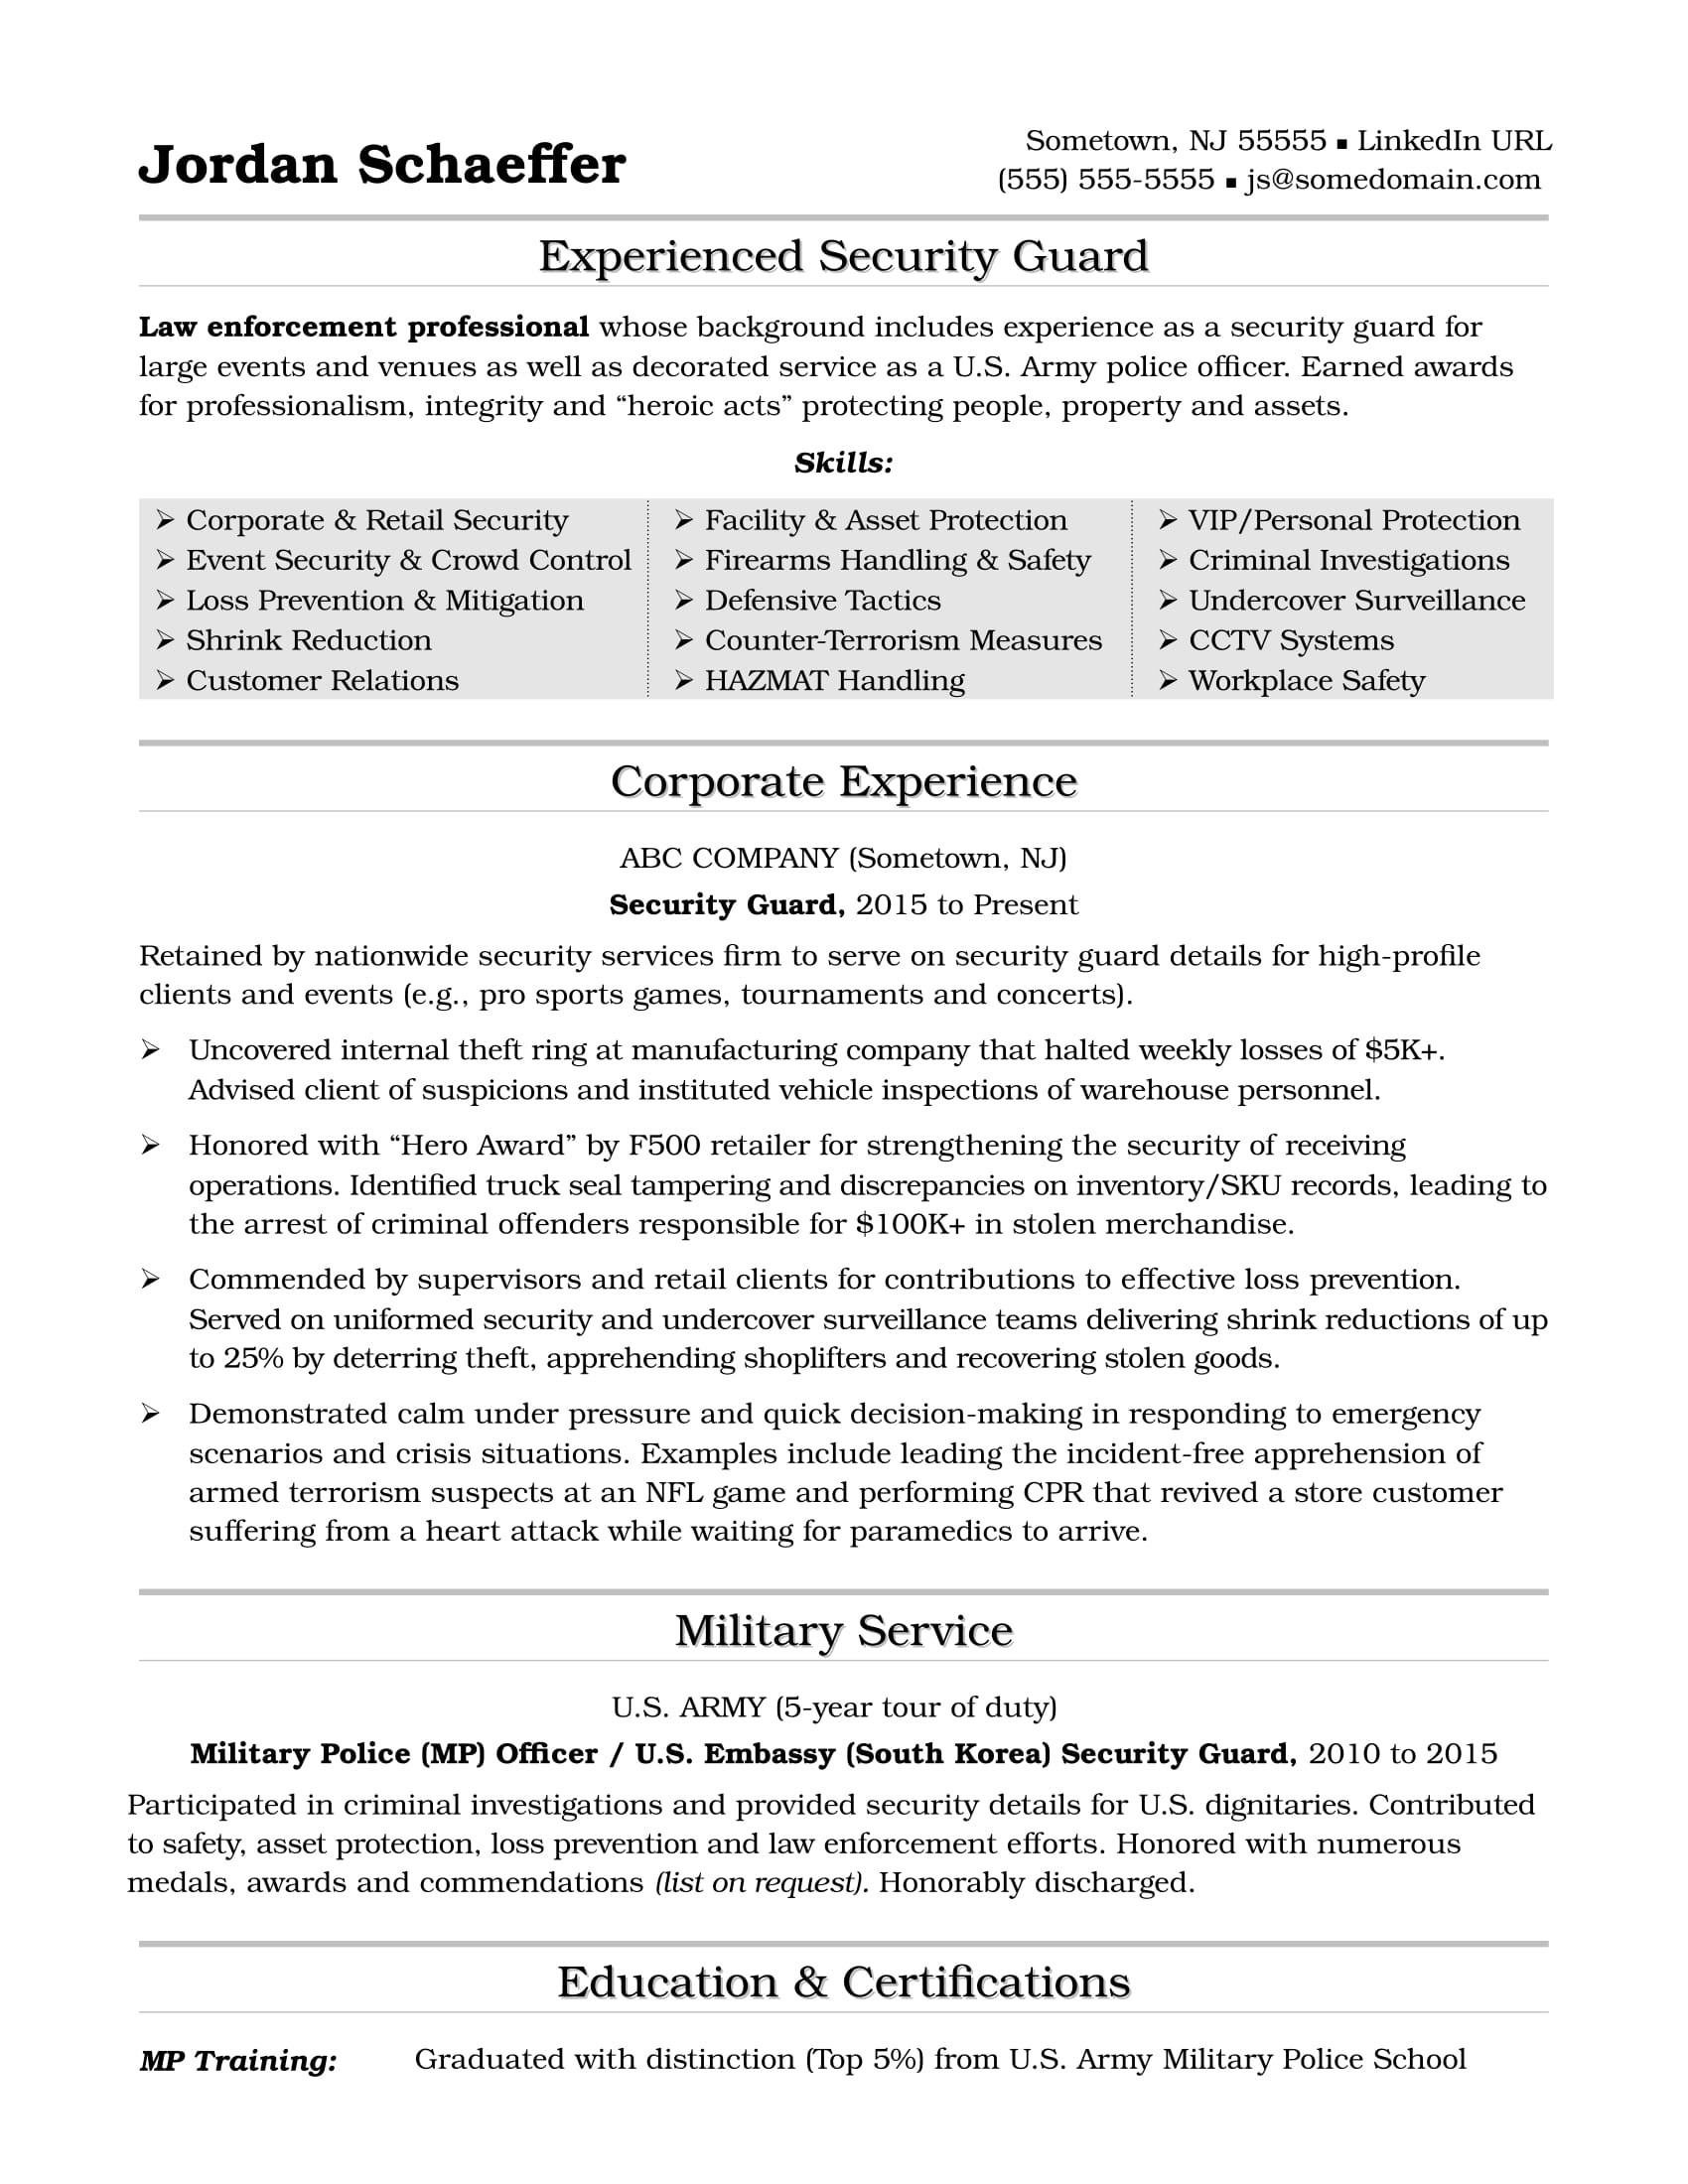 Security Guard Resume Sample without Experience Security Guard Resume Monster.com